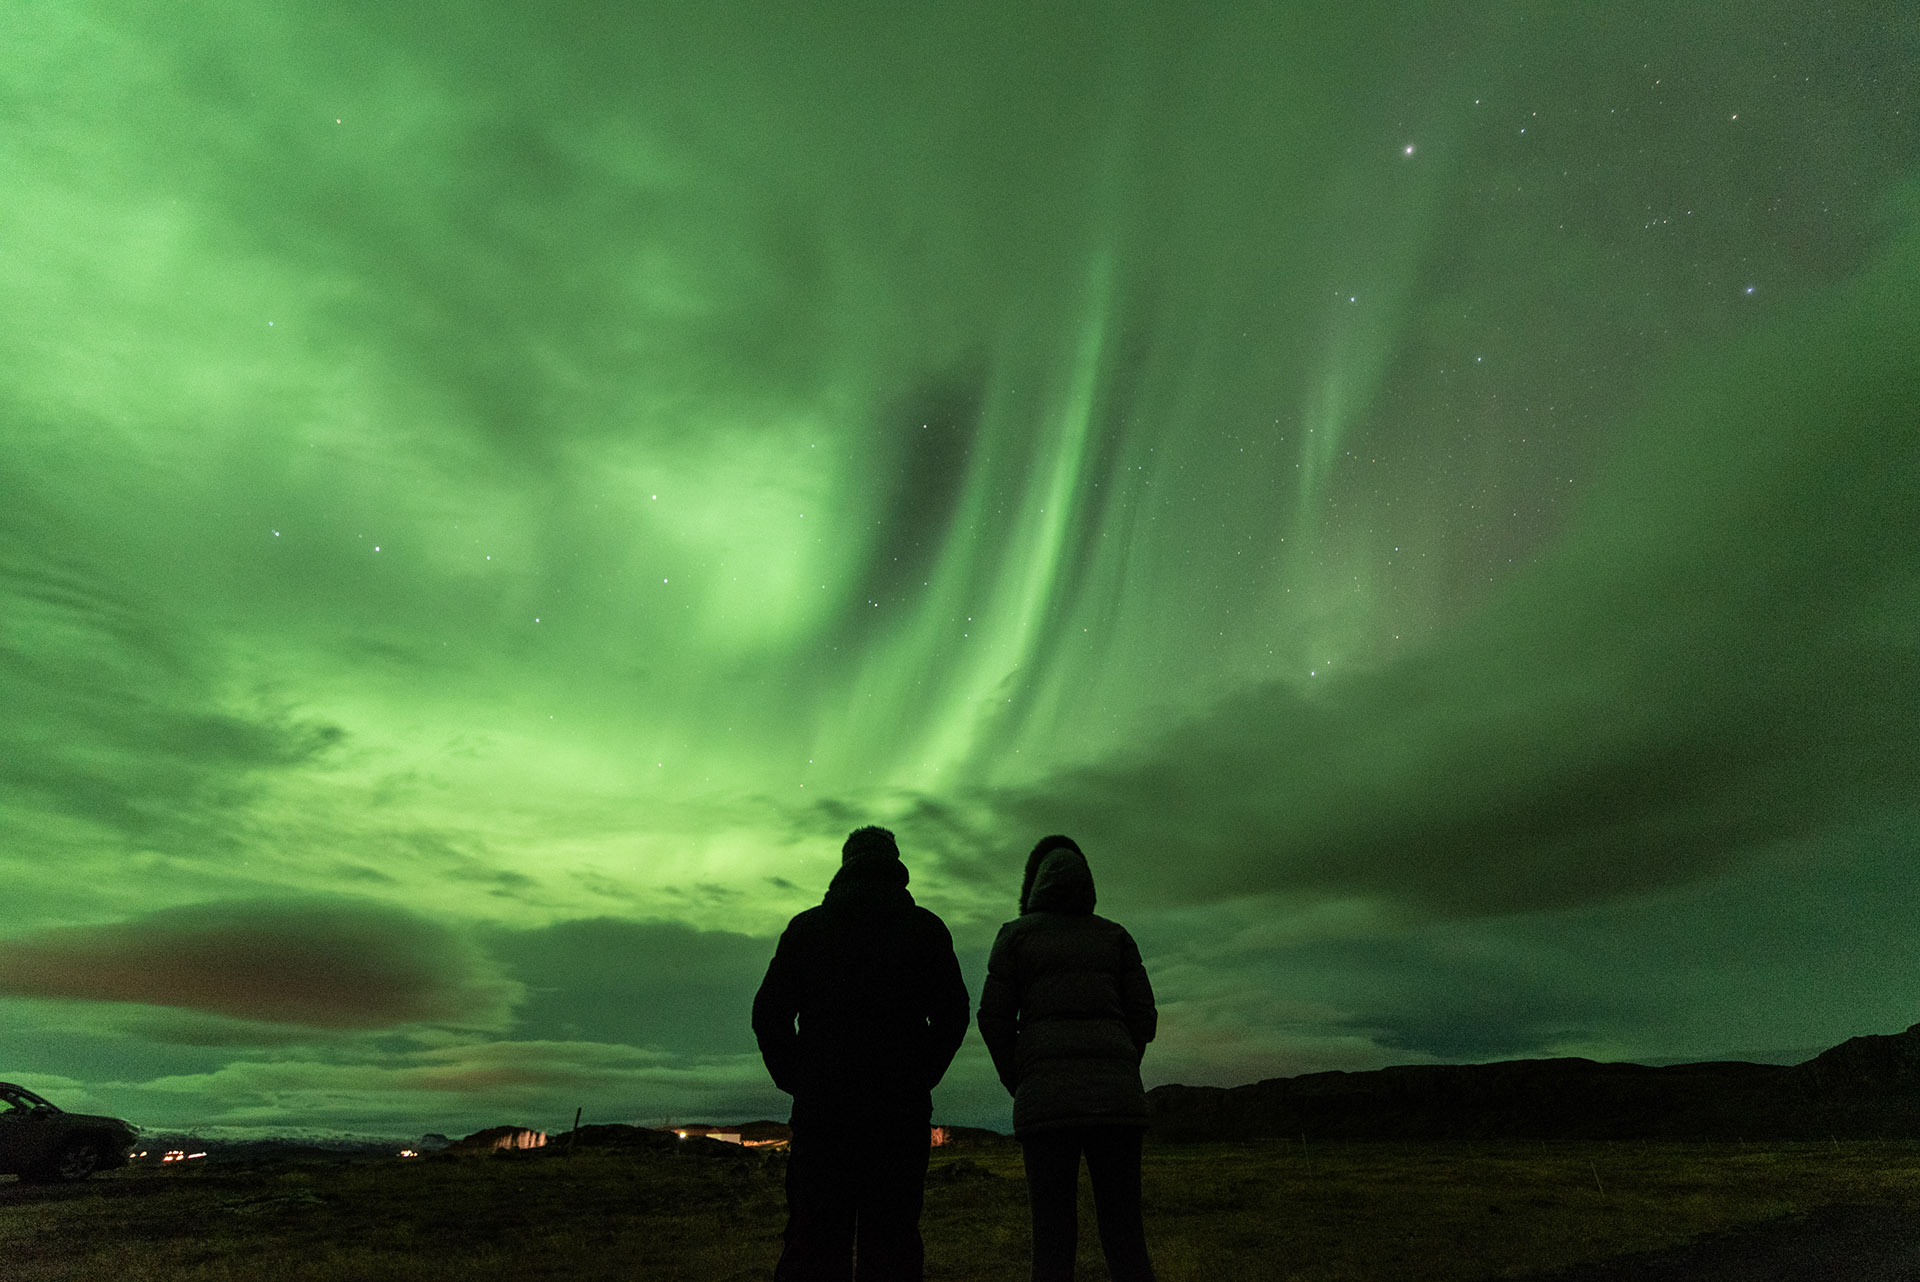 people watching the aurora. The best place to see the northern lights is with someone you love.